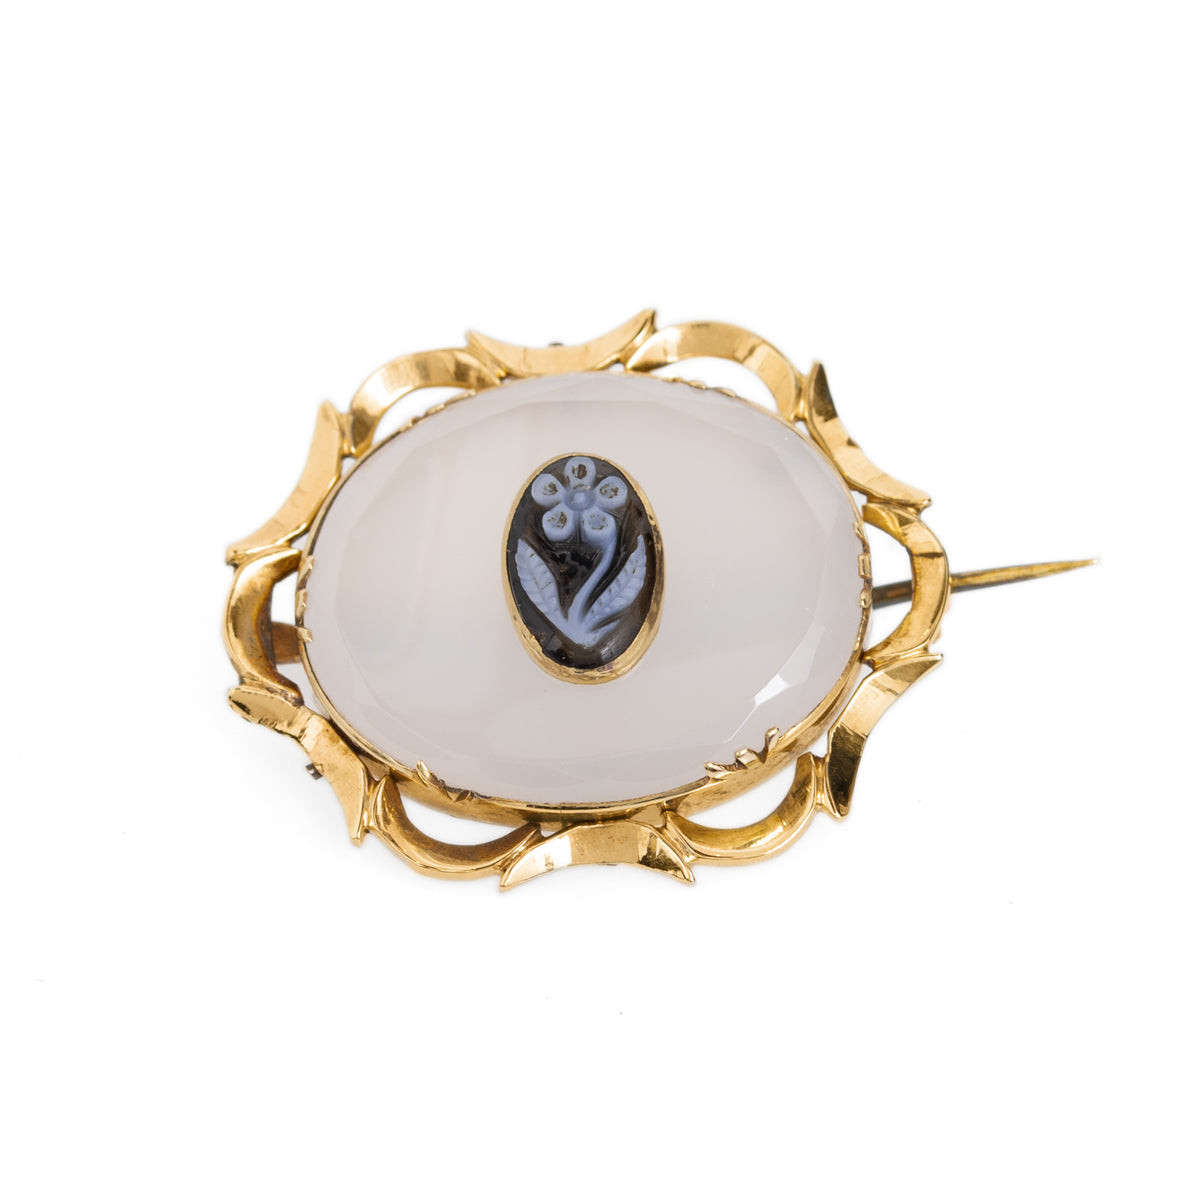 Antique Victorian Gold, Chalcedony & Carved Agate 2nd Period Mourning Brooch (Code A1043)